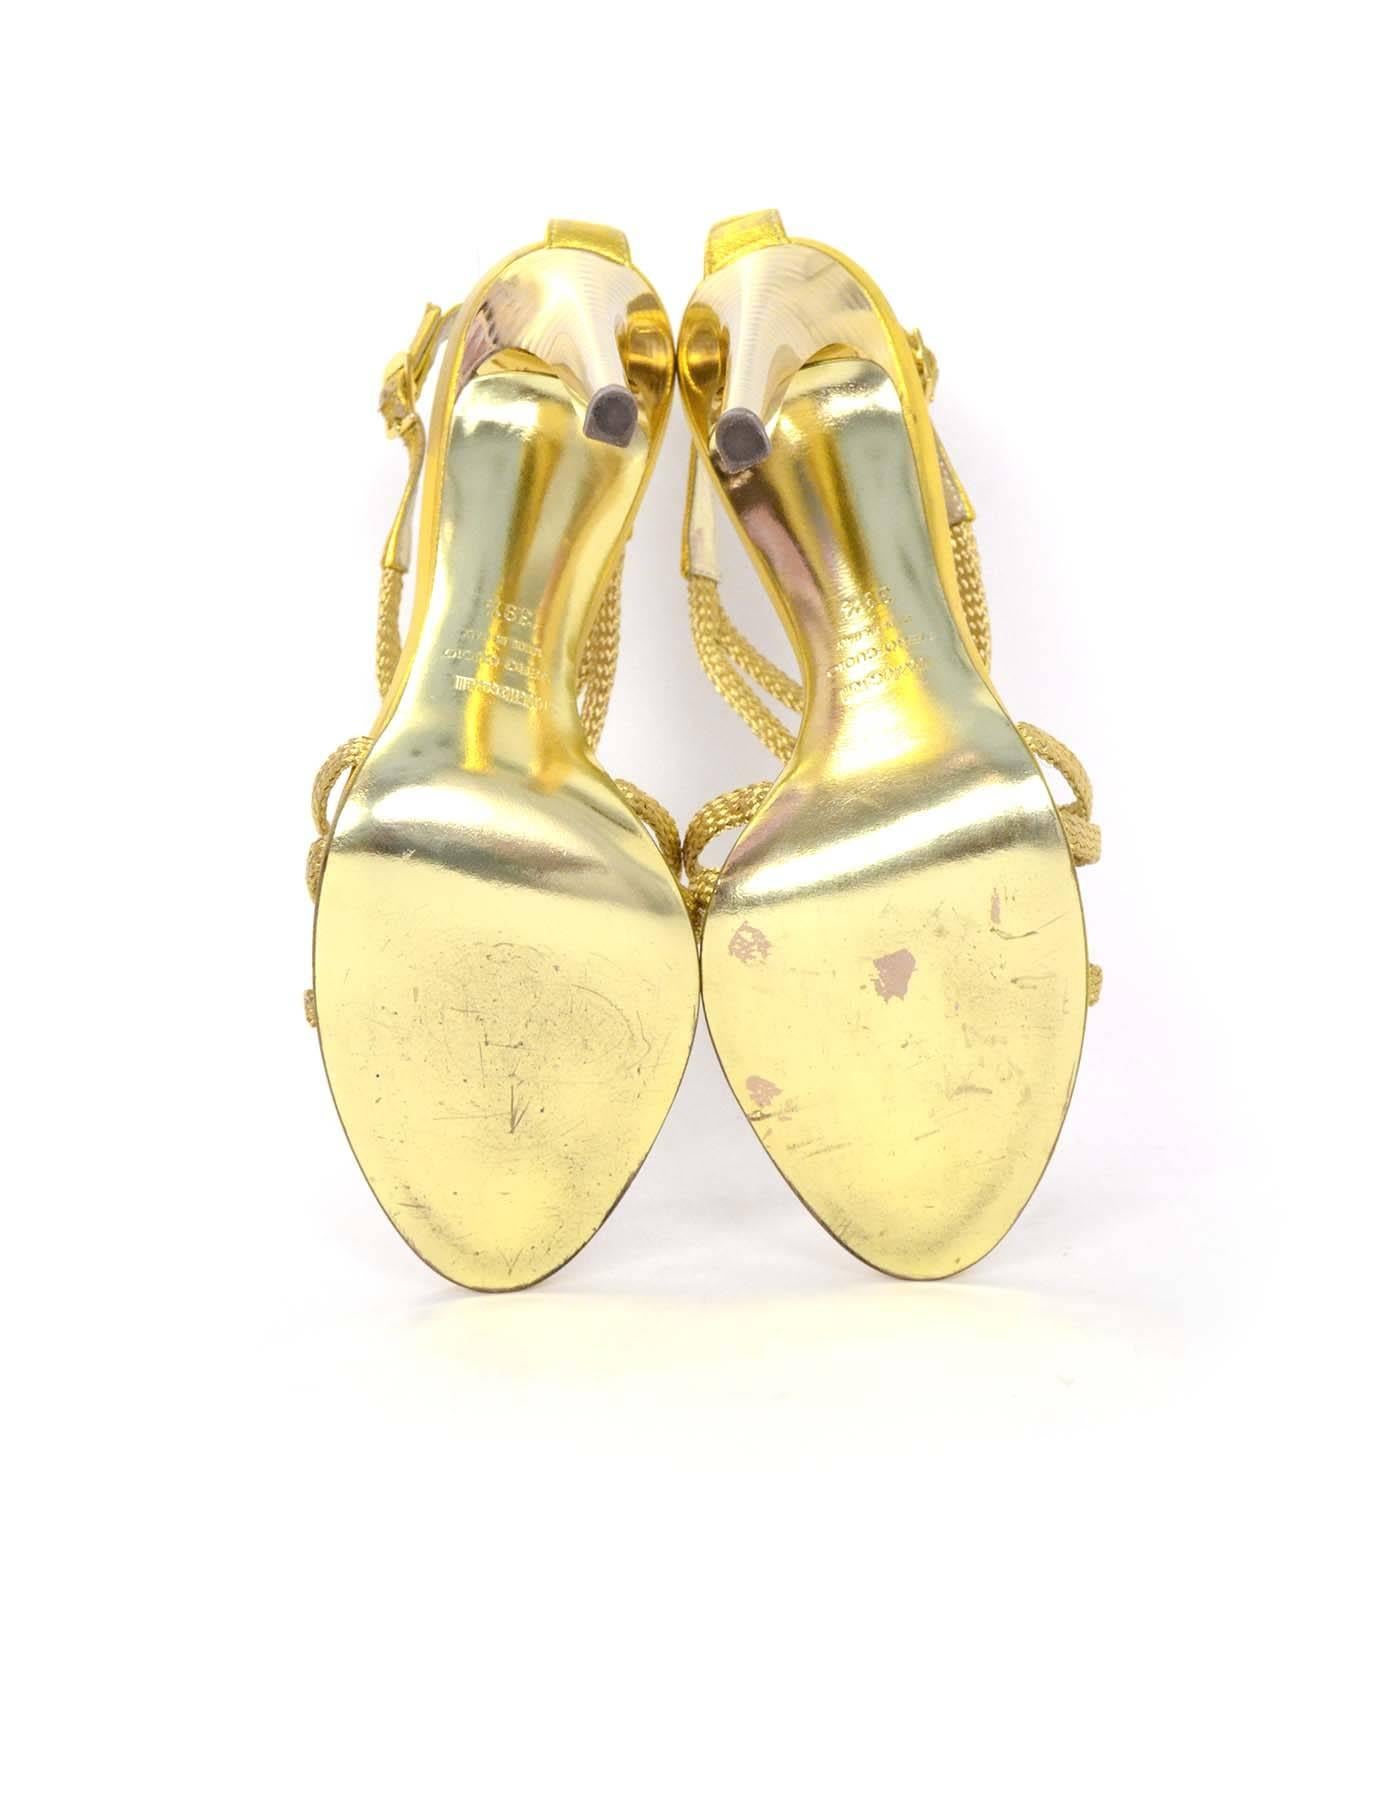 Roberto Cavalli Gold Sandals Sz 39.5 with Dust Bag and Box 3